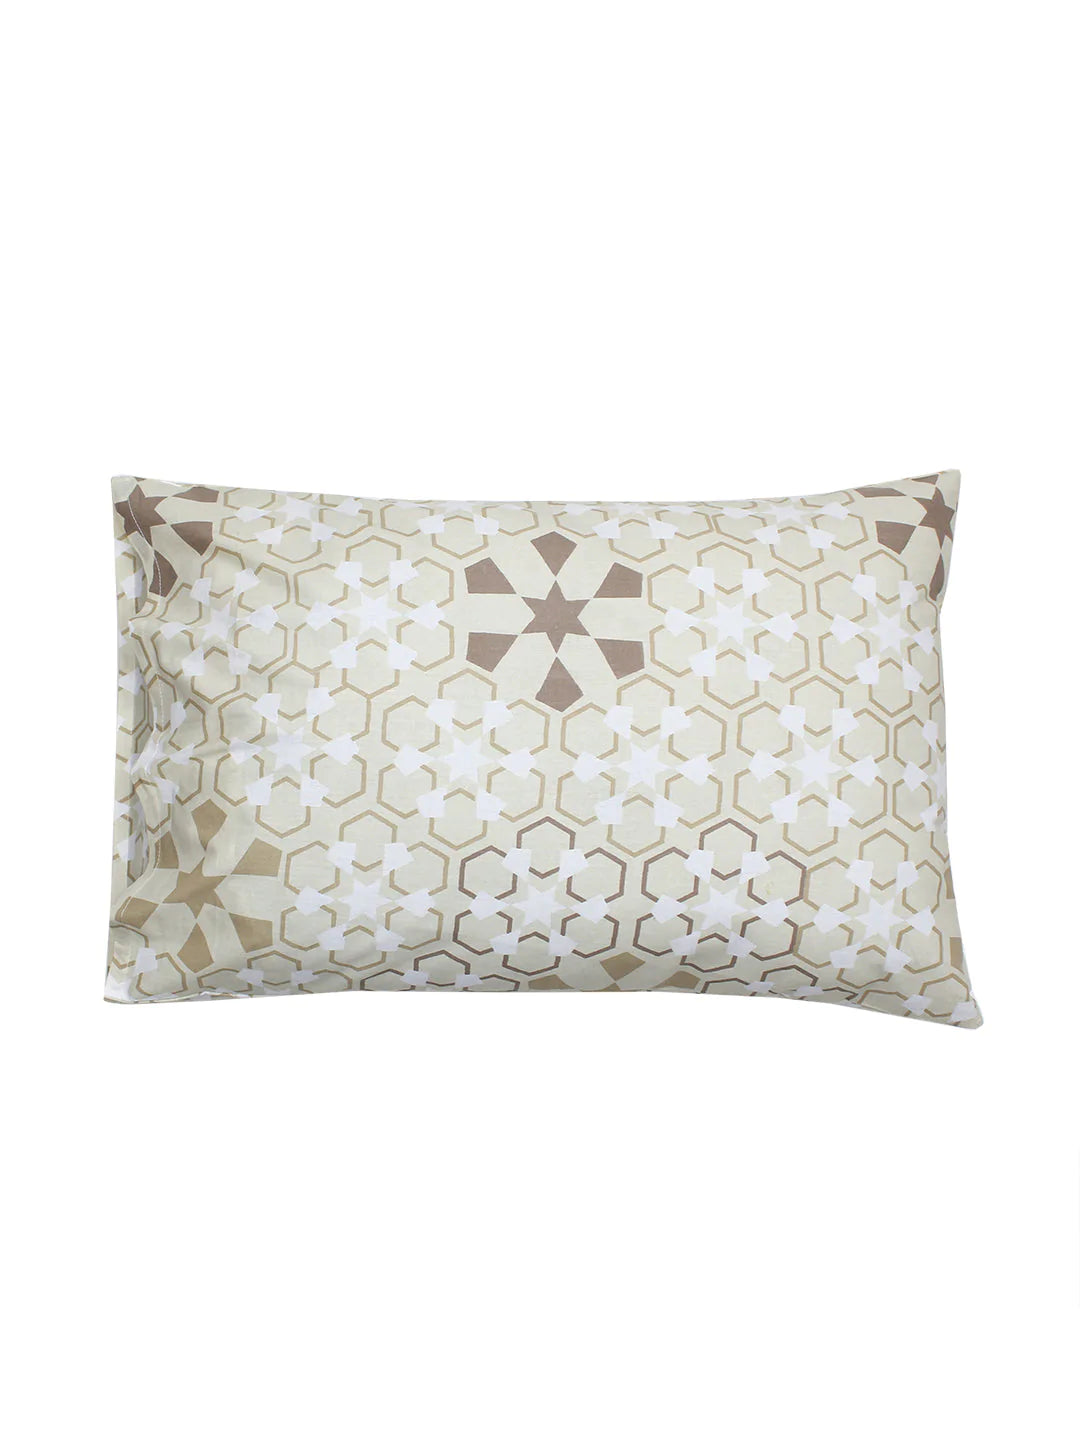 The Wily Kaleidoscope Beige Pillow Cover